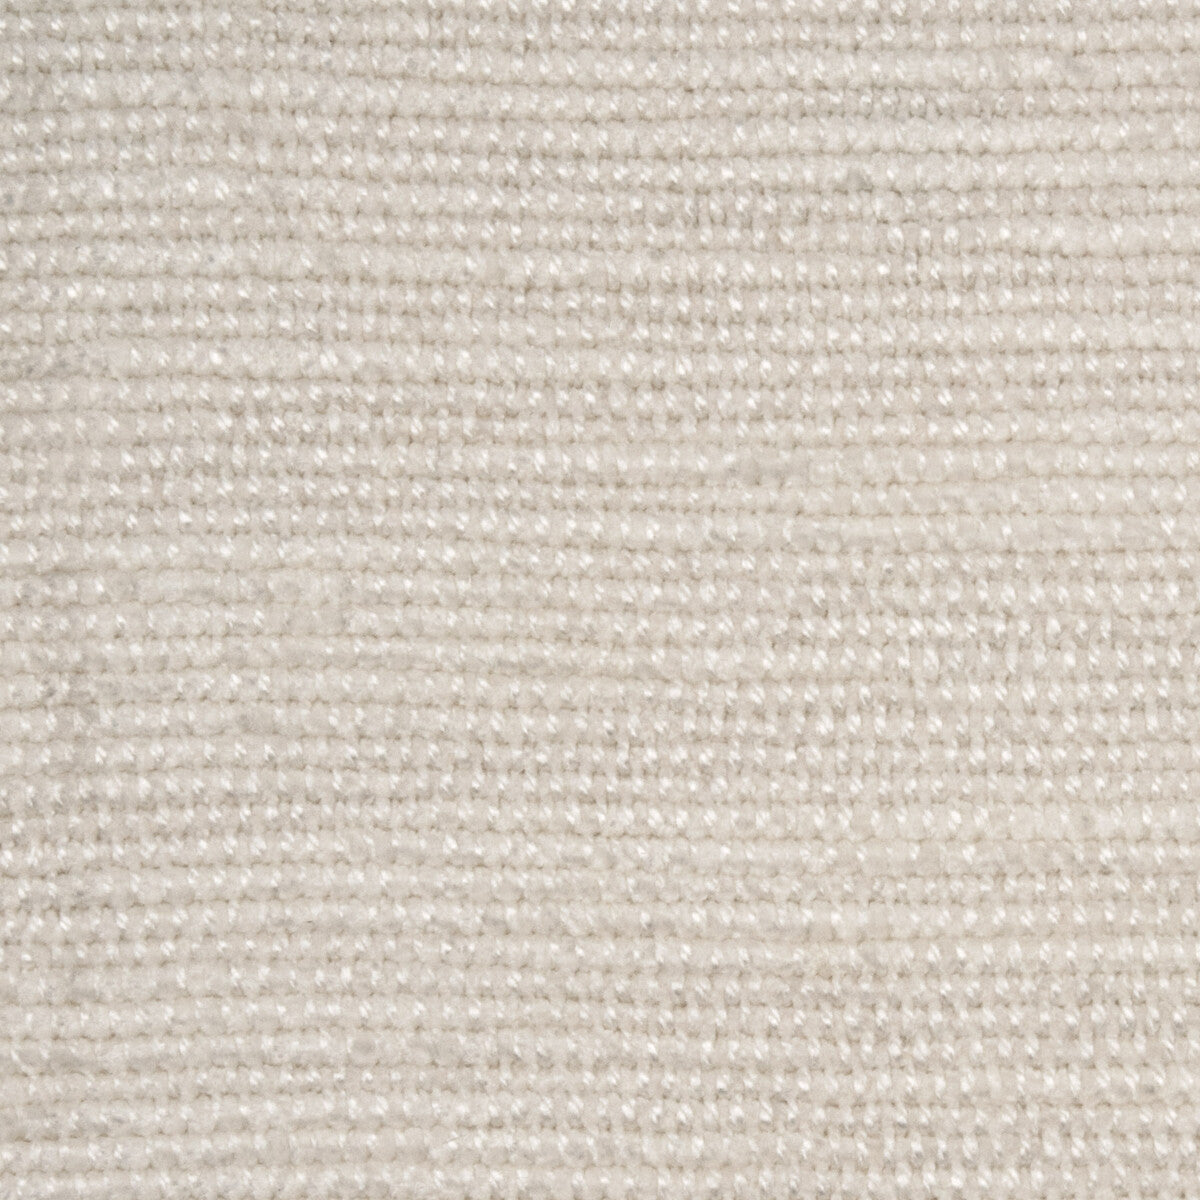 Boundless fabric in talc color - pattern 34609.100.0 - by Kravet Couture in the Calvin Klein Home collection